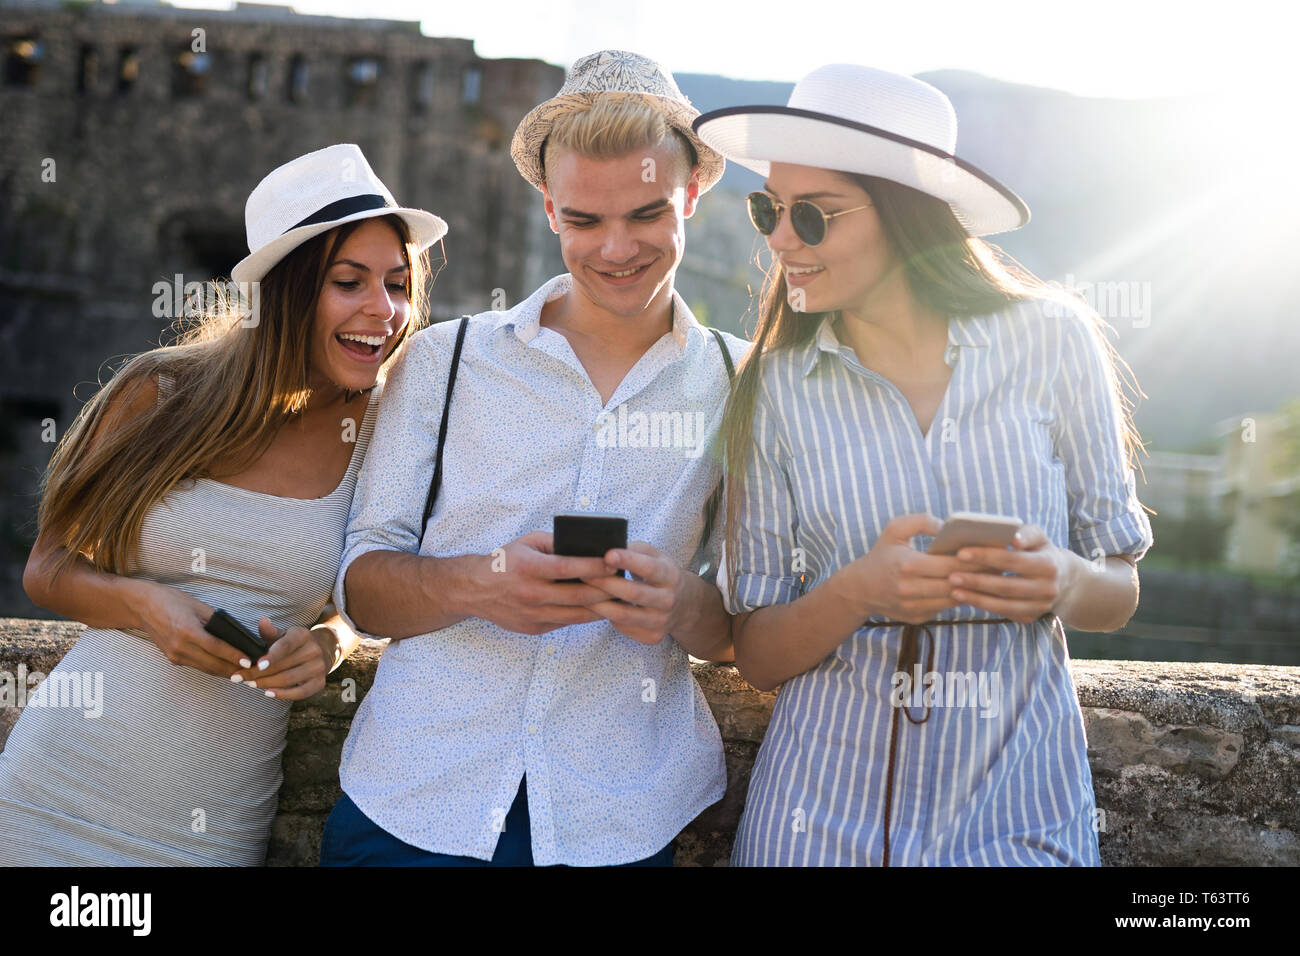 Group of friends spending quality time together in city Stock Photo